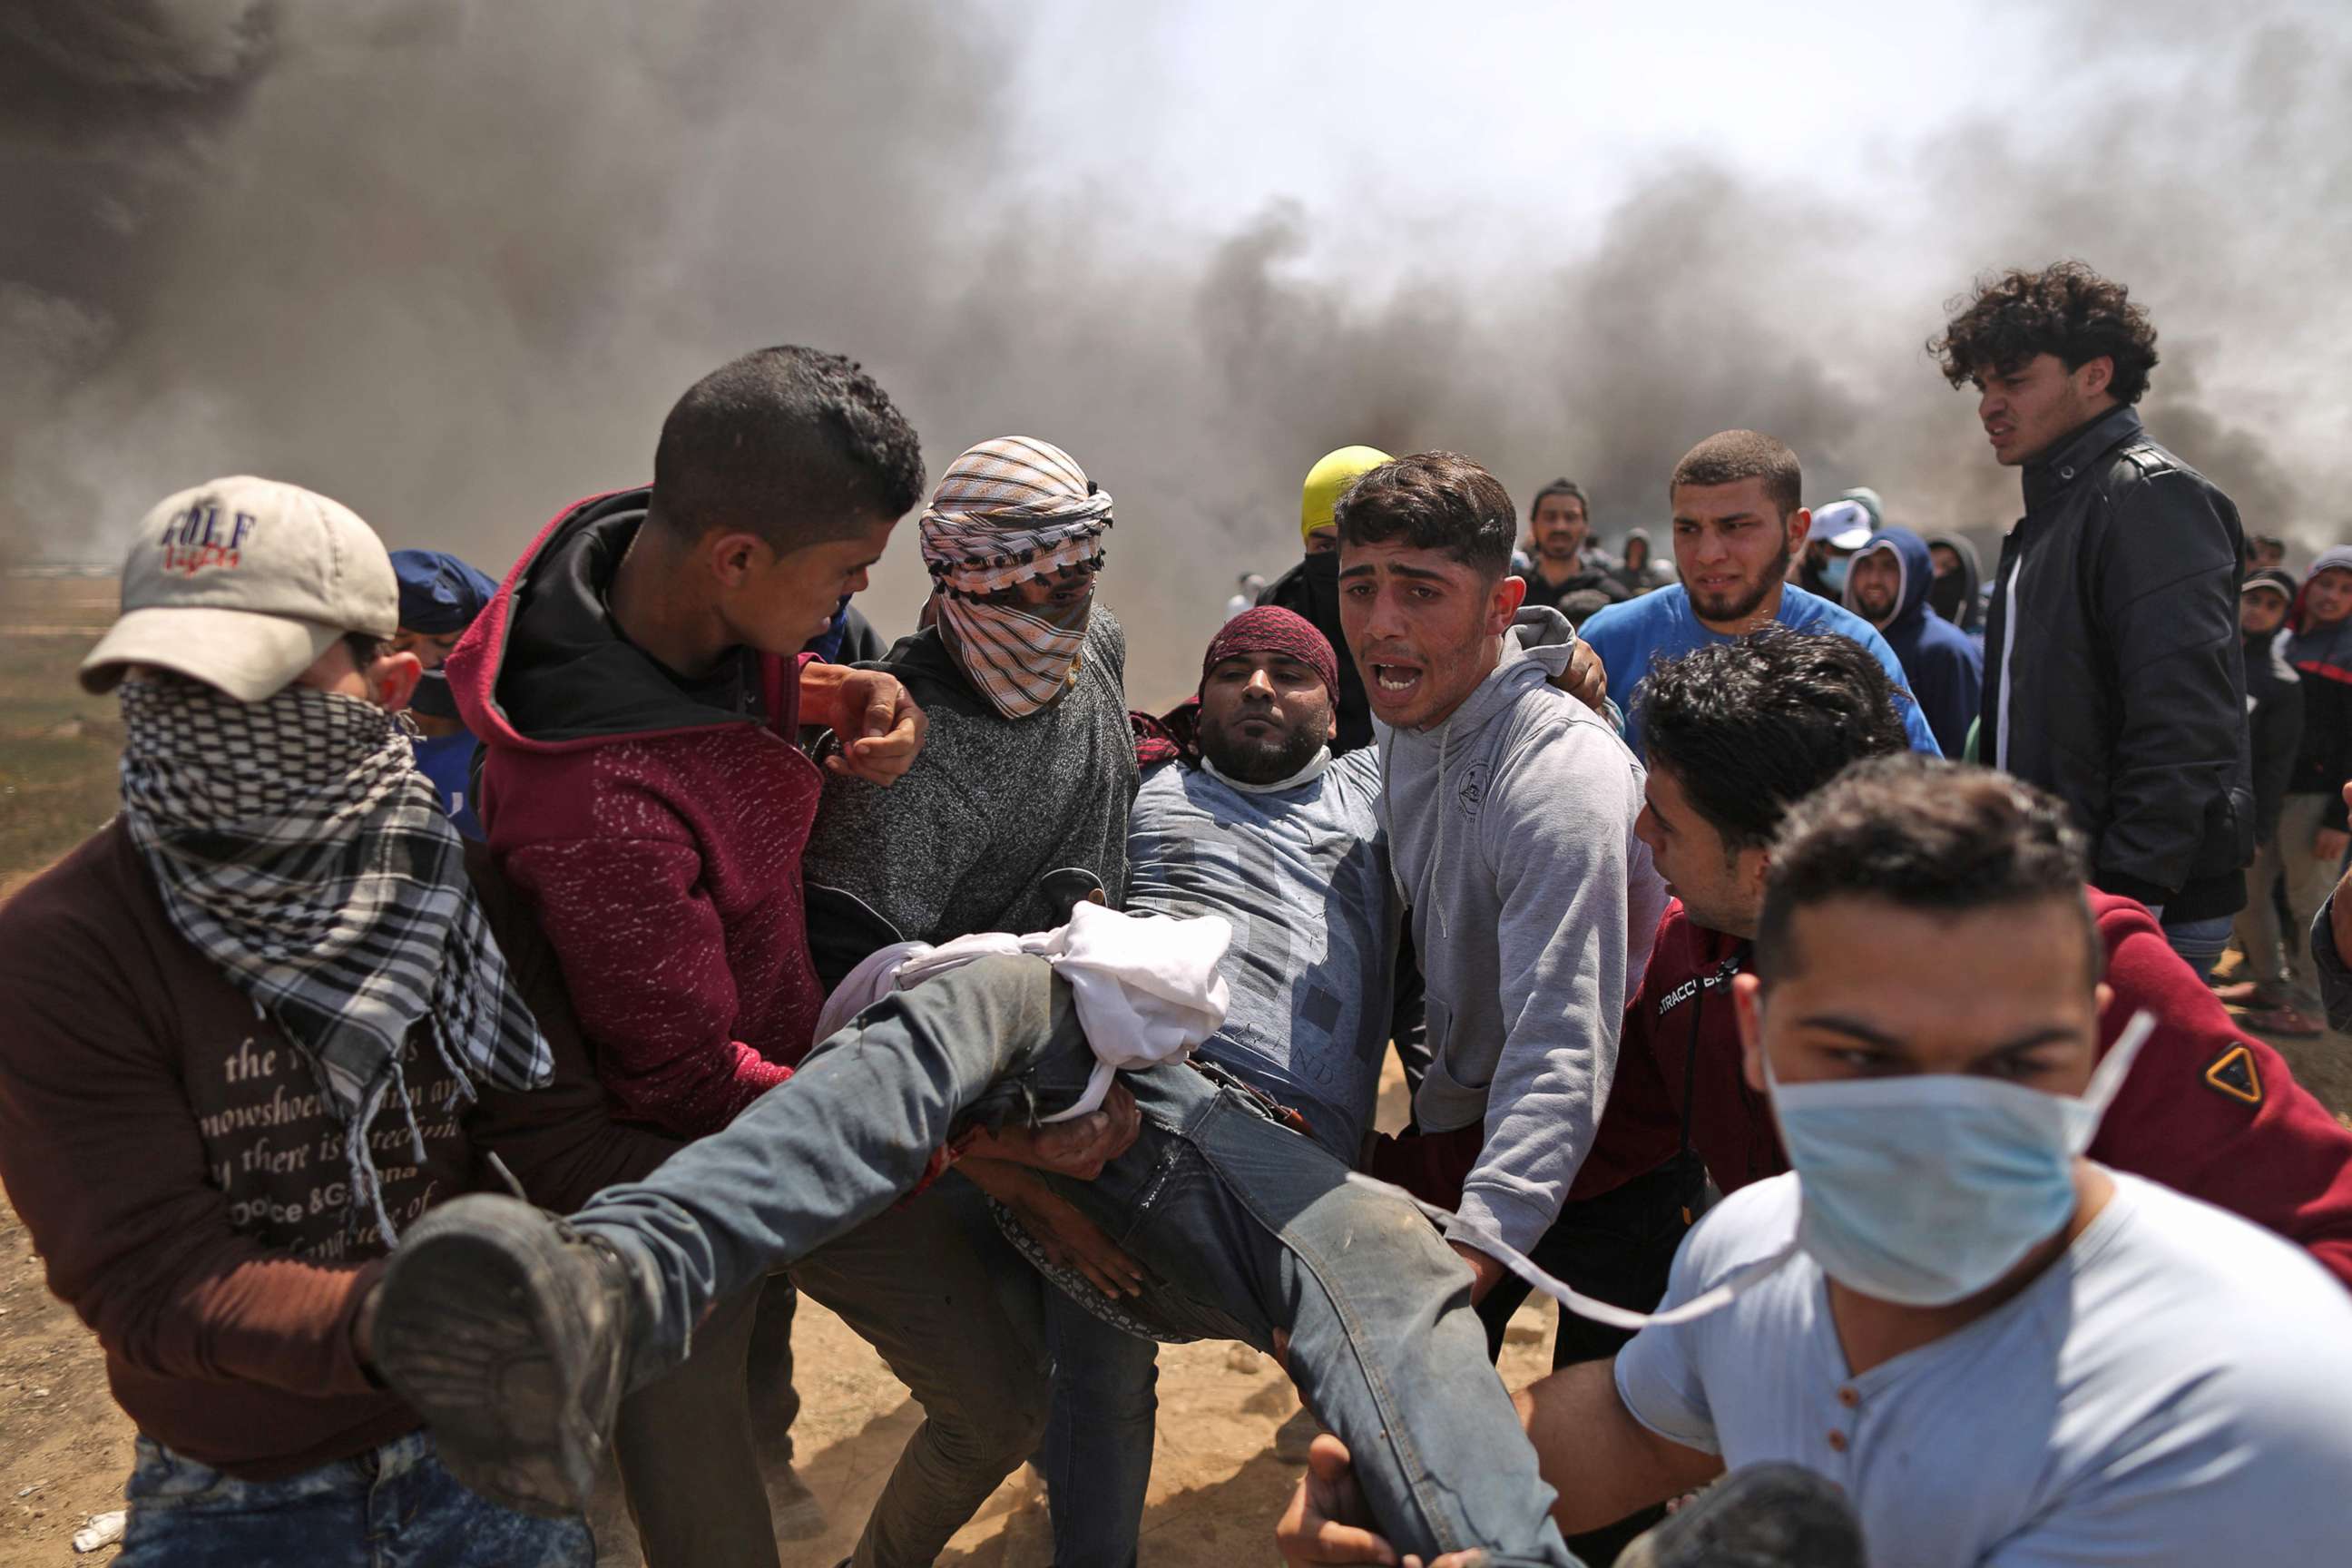 PHOTO: Palestinian men carry an injured protester after clashes with Israeli forces at the Israel-Gaza border during a protest, east of Gaza City in the Gaza strip, April 6, 2018.